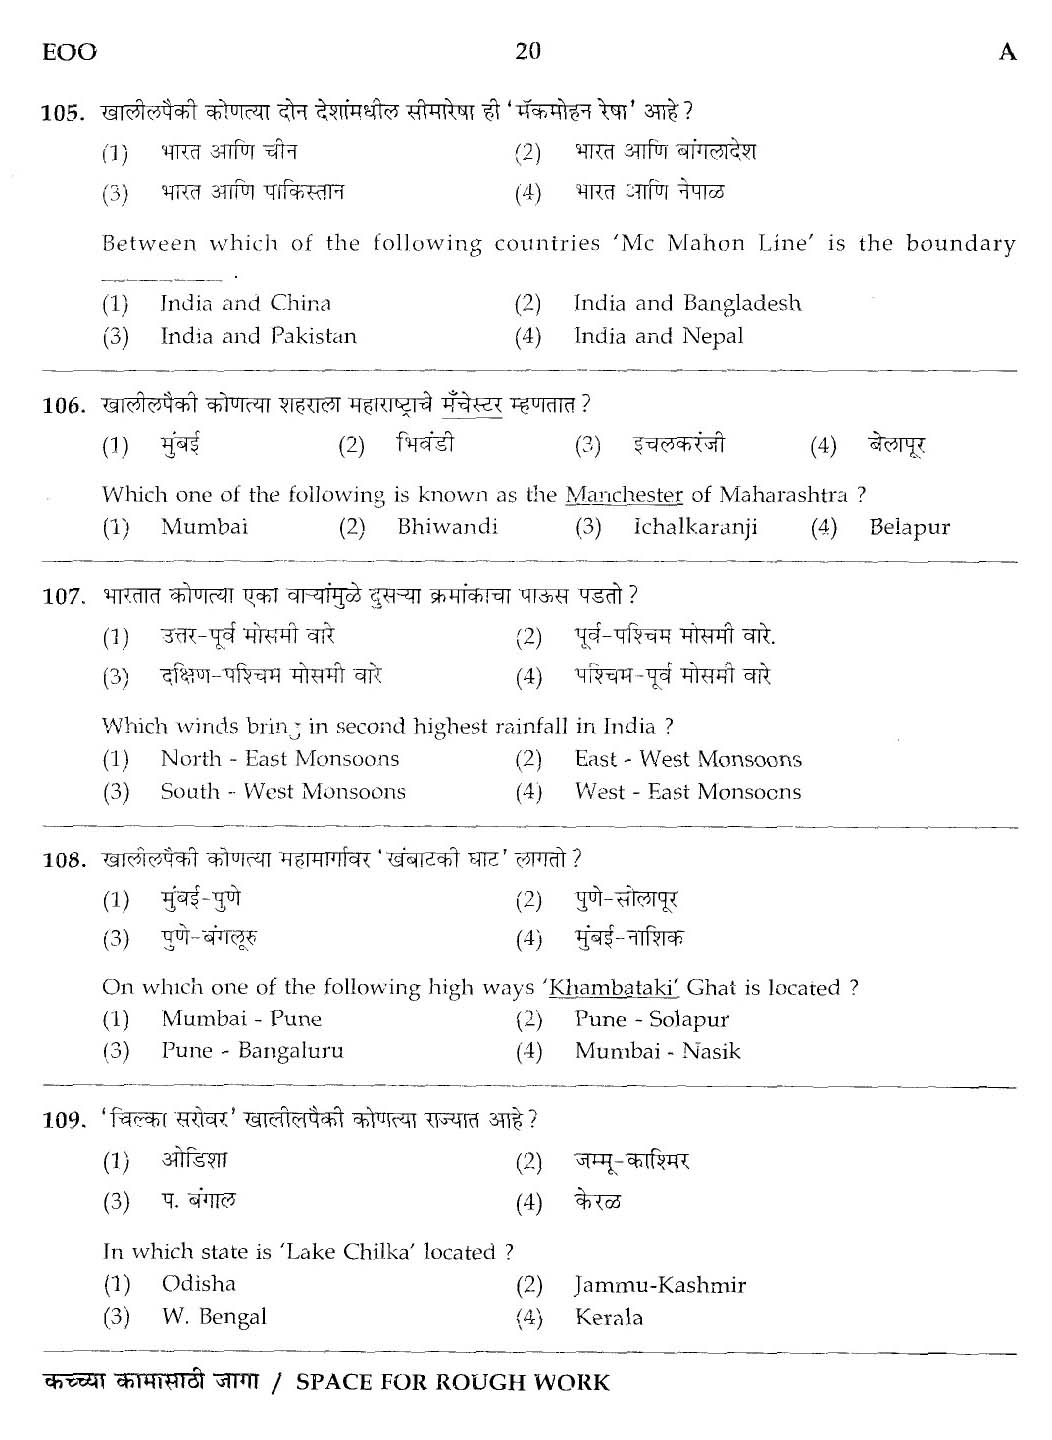 MPSC Agricultural Services Preliminary Exam 2012 Question Paper 19